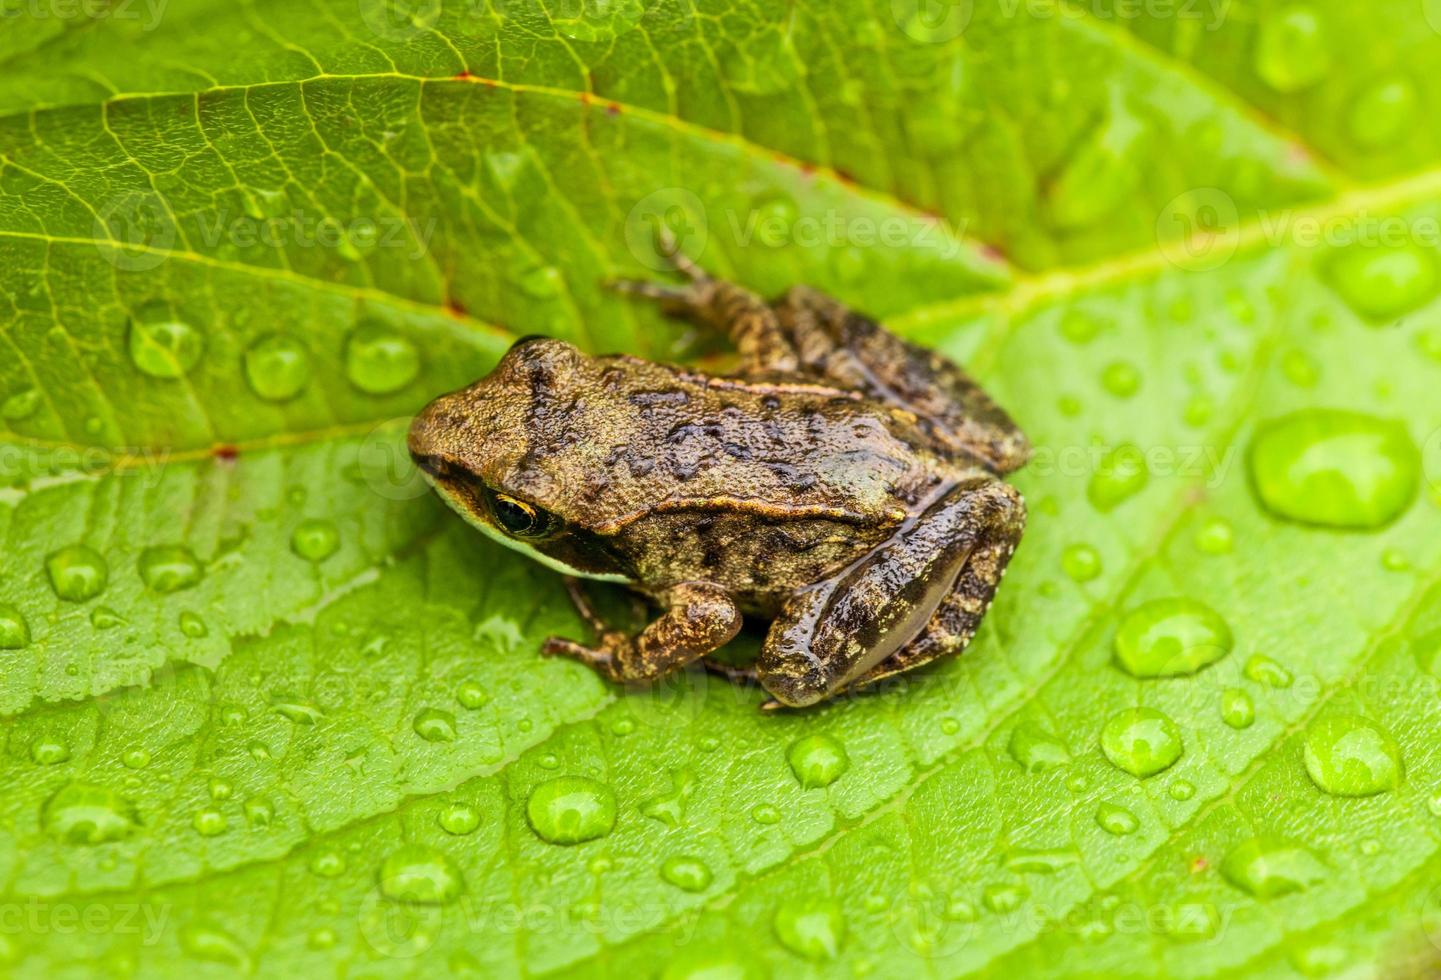 Miniature from sitting on a Wet Leaf photo